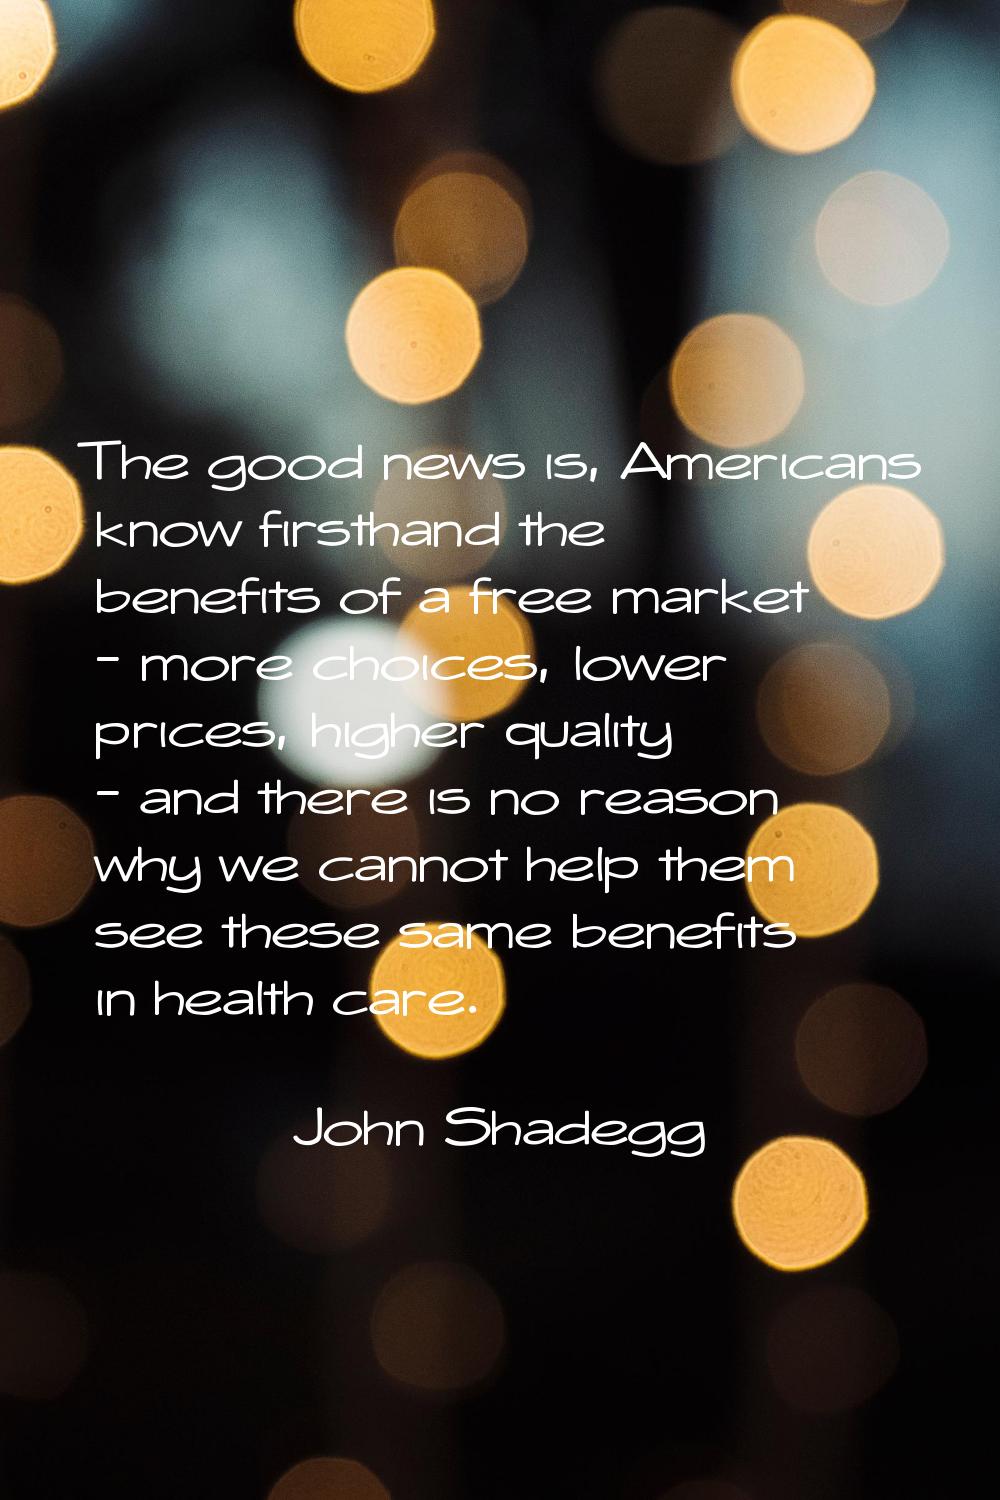 The good news is, Americans know firsthand the benefits of a free market - more choices, lower pric